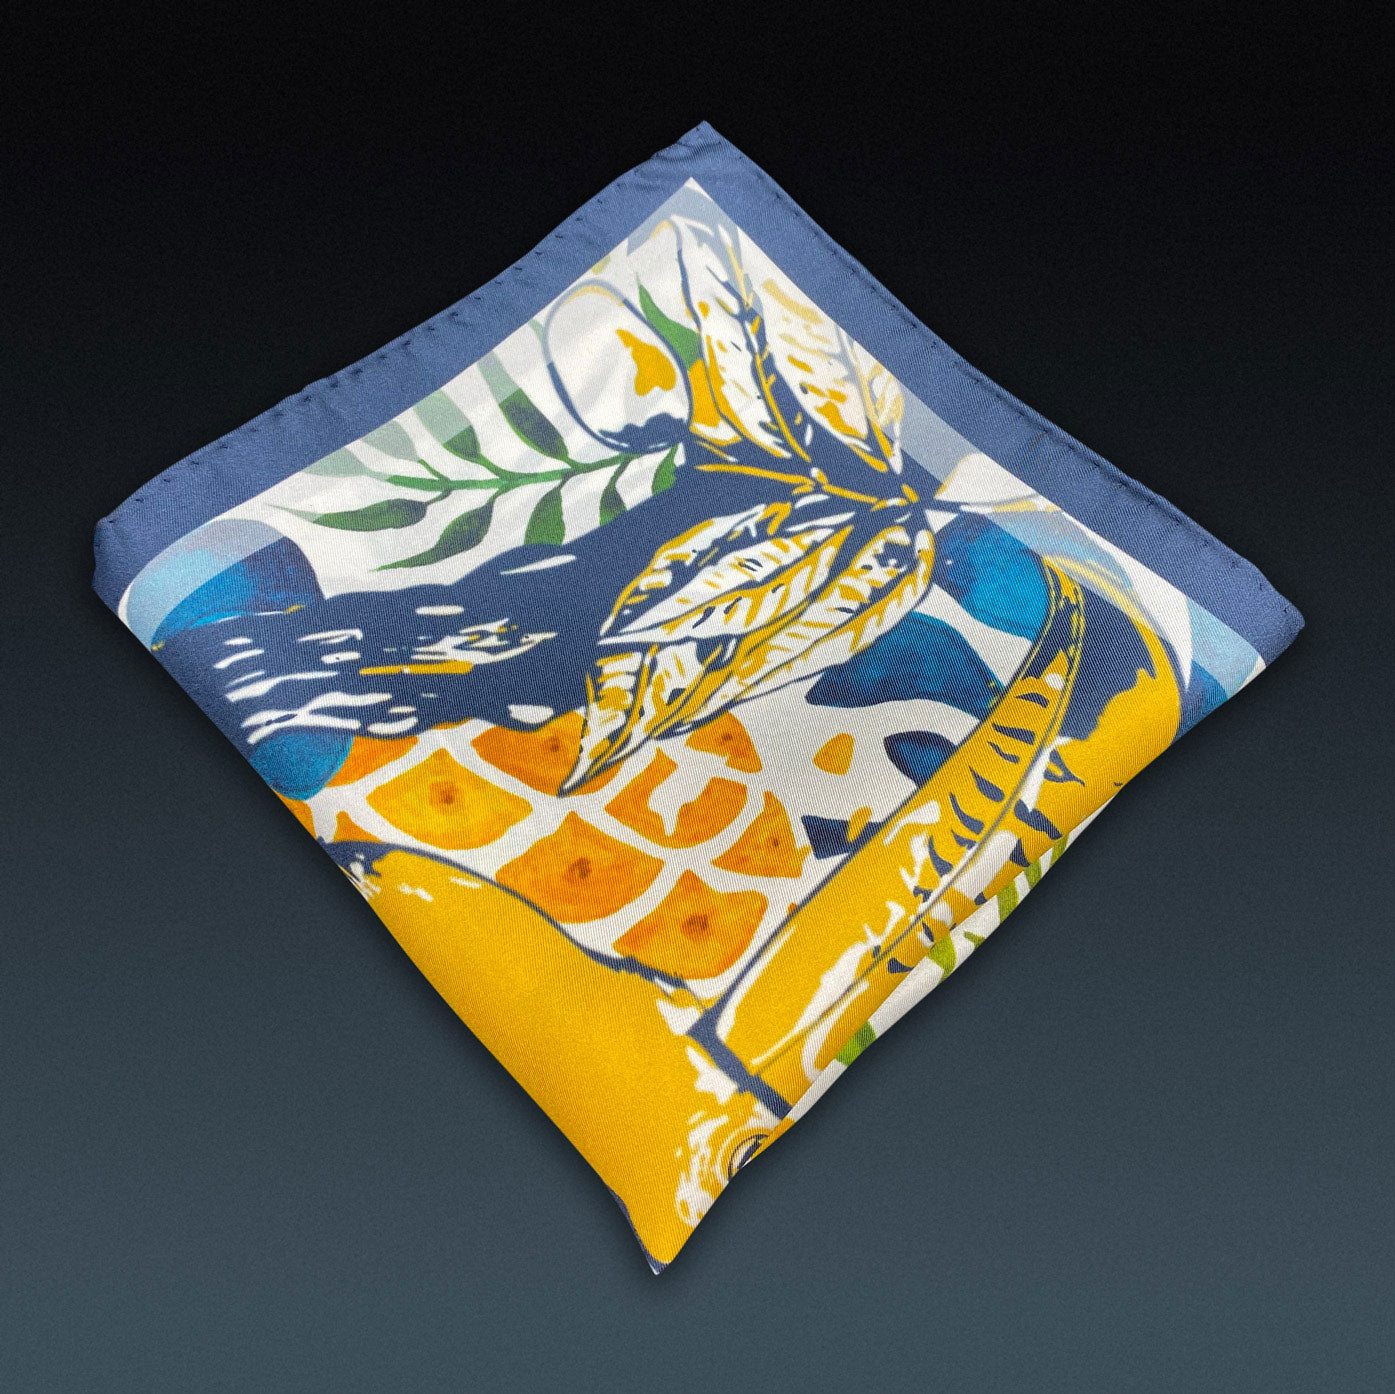 Folded 'Tees' silk pocket square from SOHO Scarves, showing the tropical silk screen pattern. Placed on a dark background.